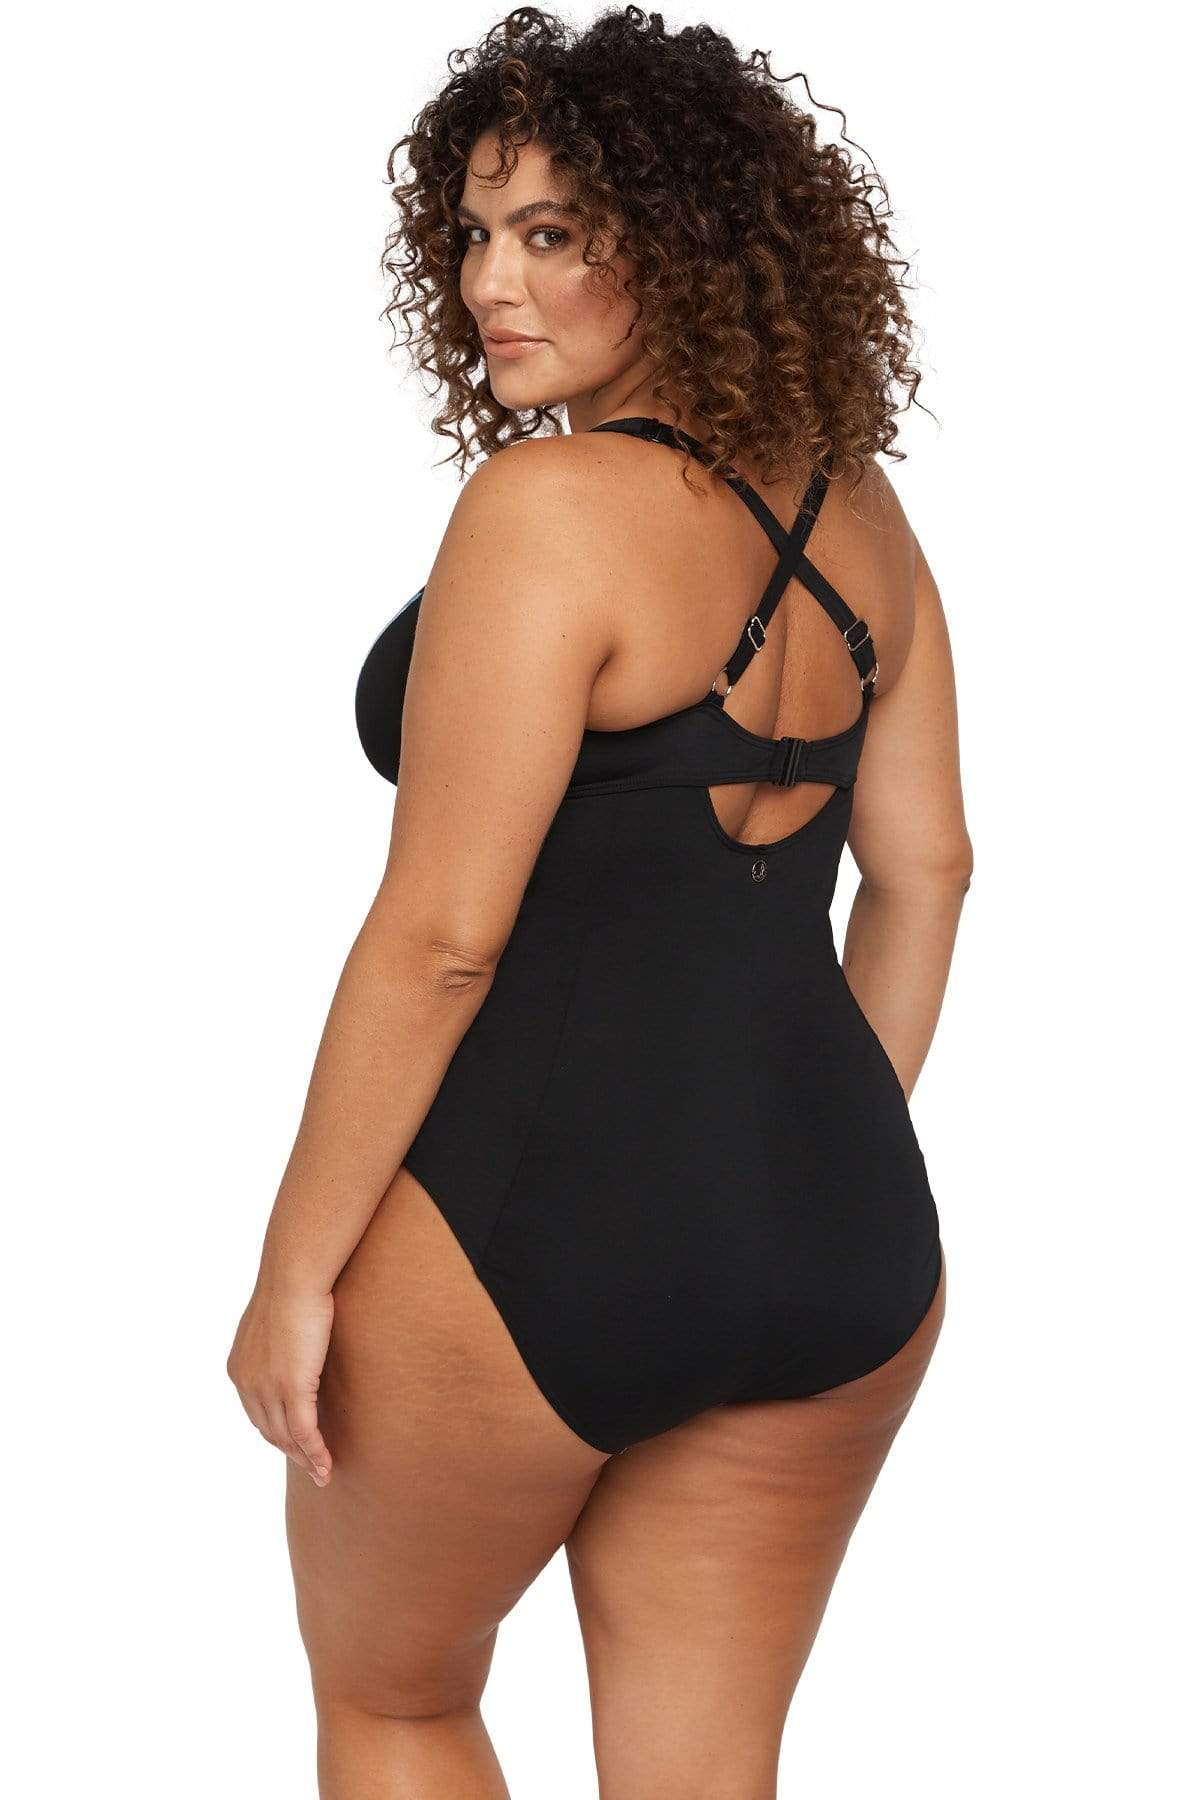 Artesands Swimwear - Delacroix one piece - One Country Mouse